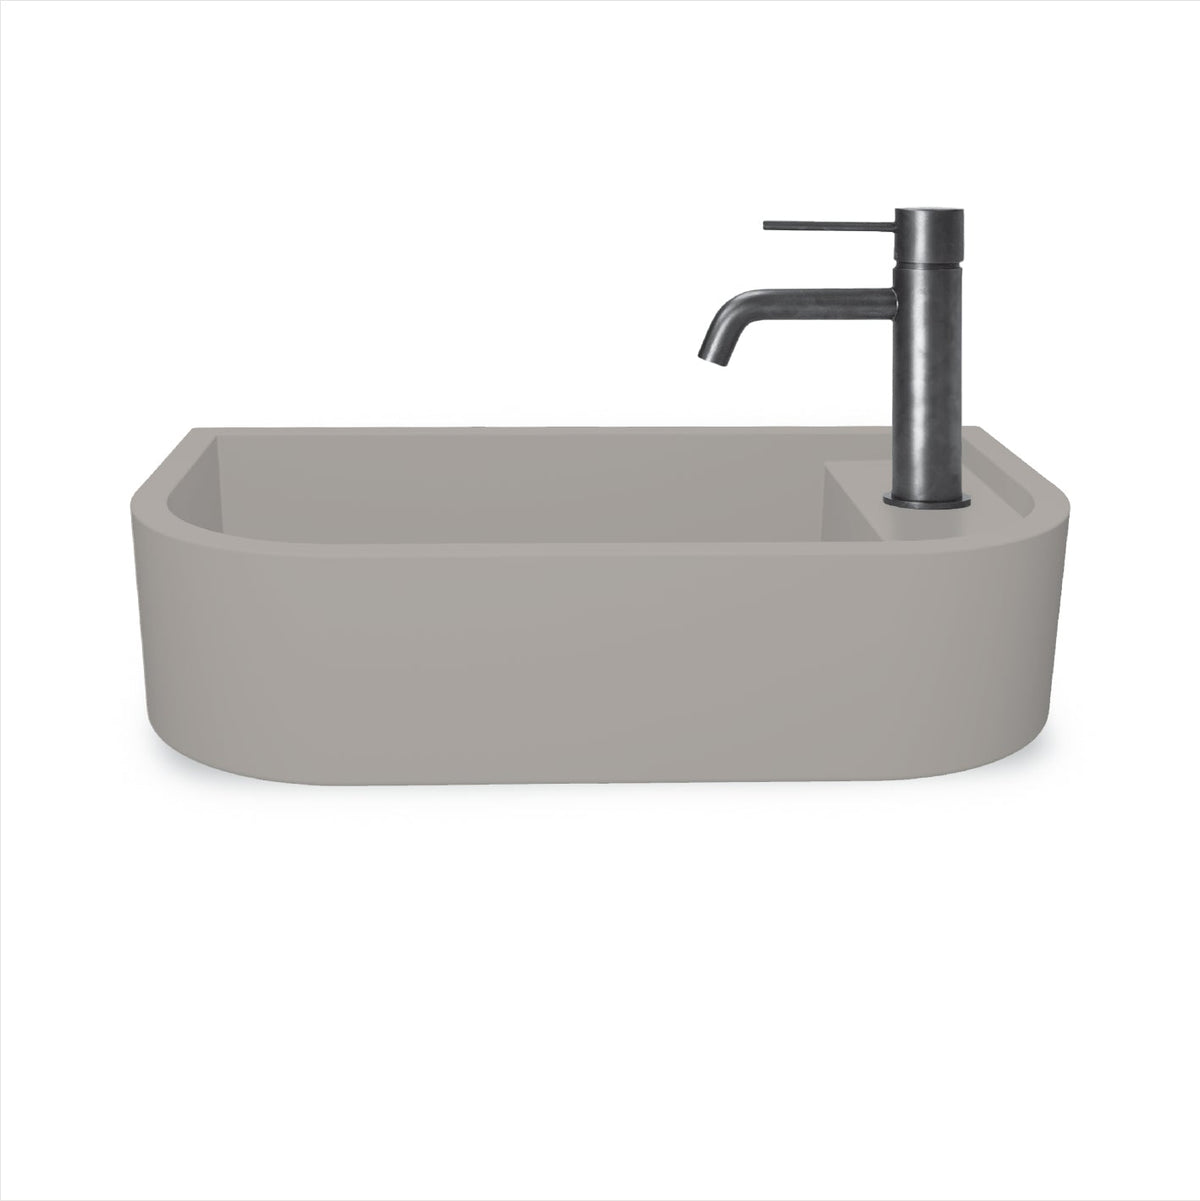 Loop 02 Basin - Overflow - Surface Mount (Sky Grey,Tap Hole,White)